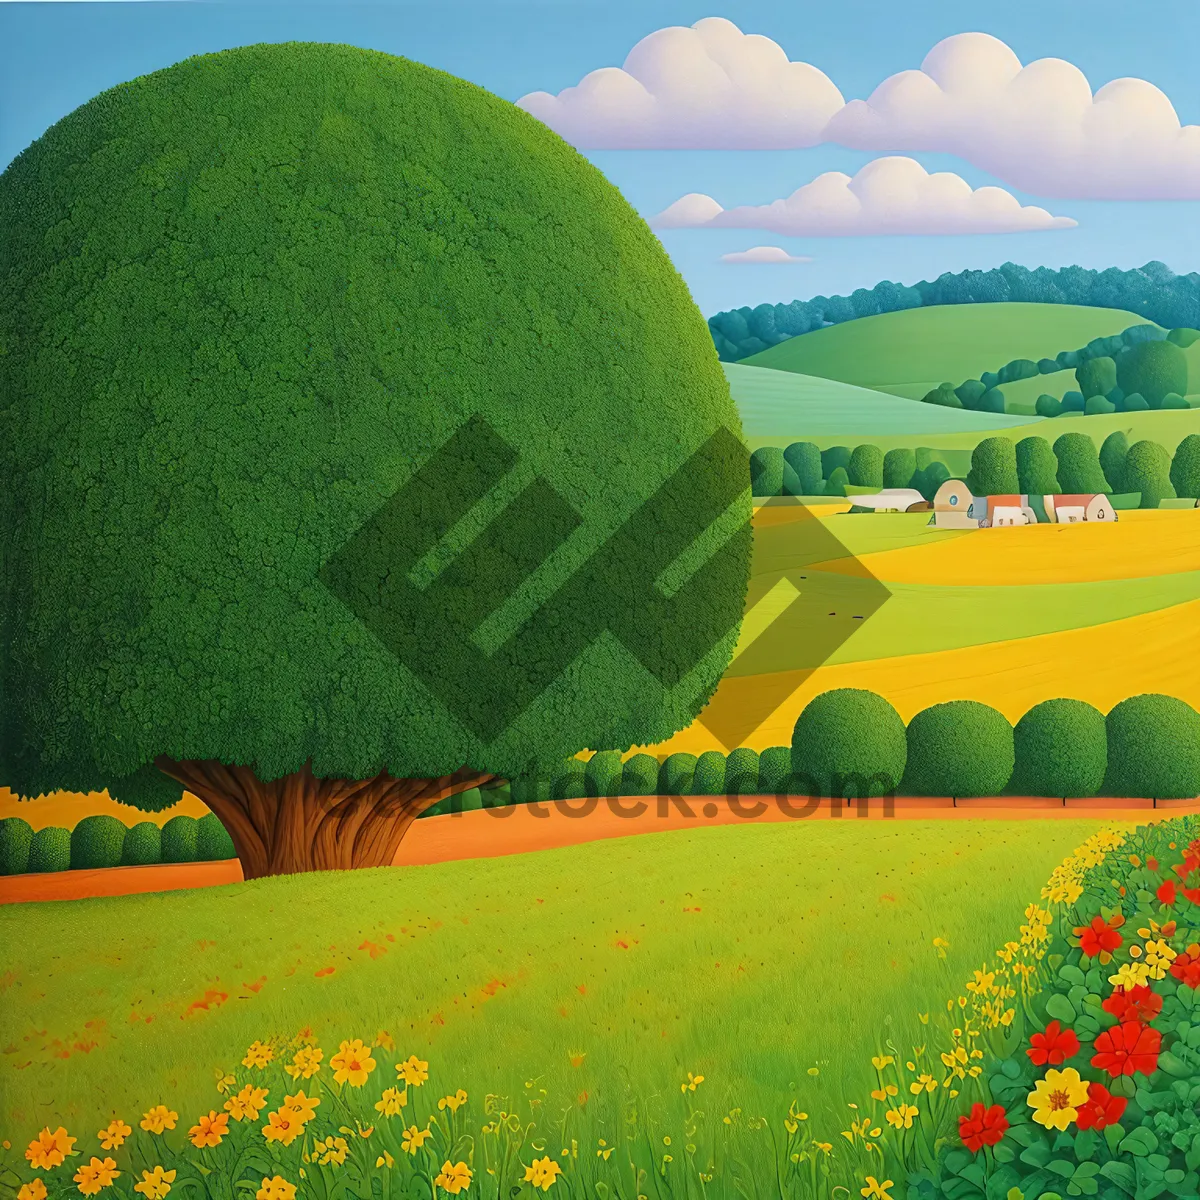 Picture of Golden Harvest Field in Rural Countryside